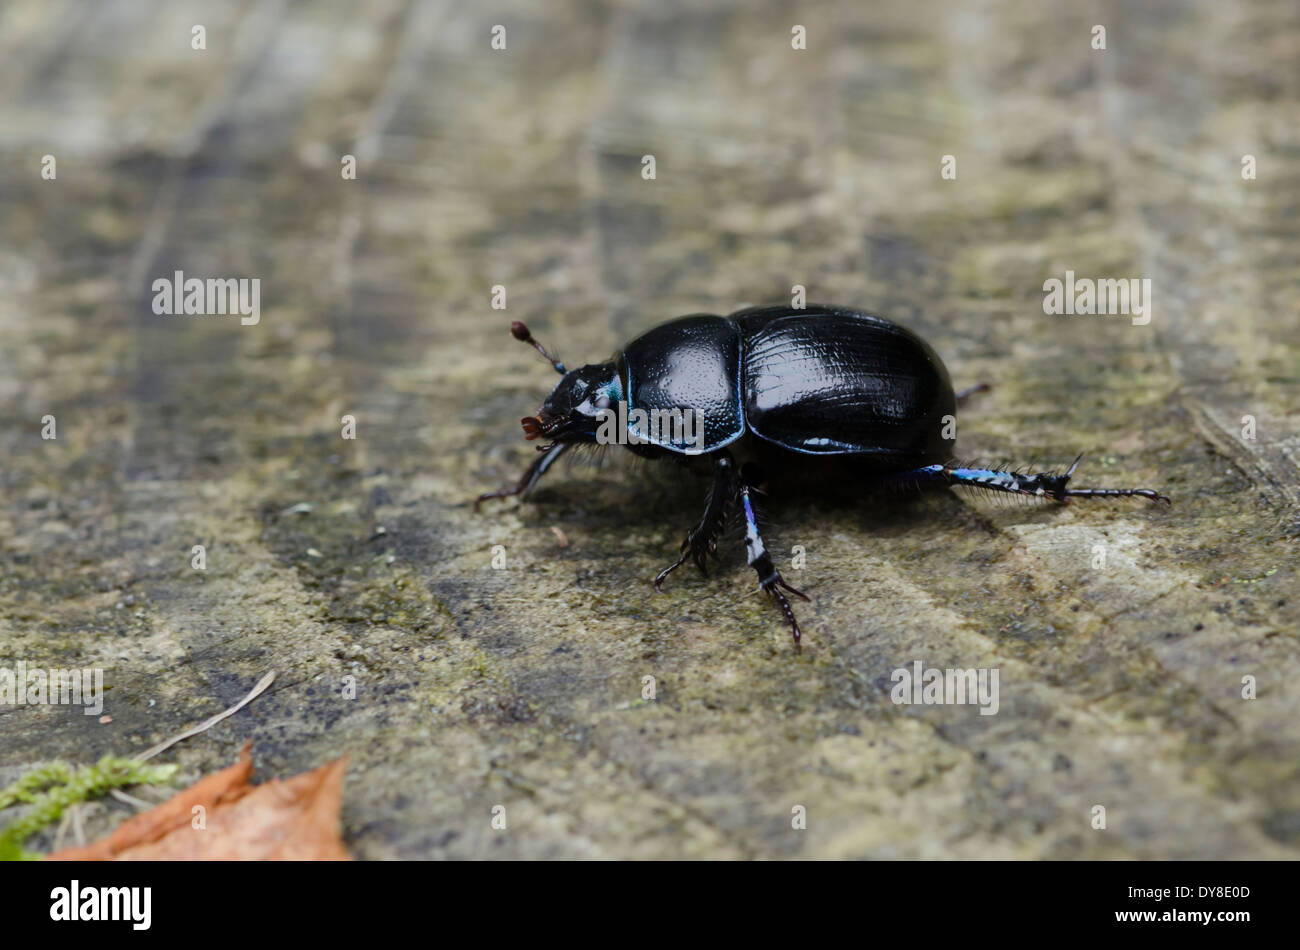 A Dor Beetle (Dung Beetle) on a tree stump in a Cumbrian forest Stock Photo